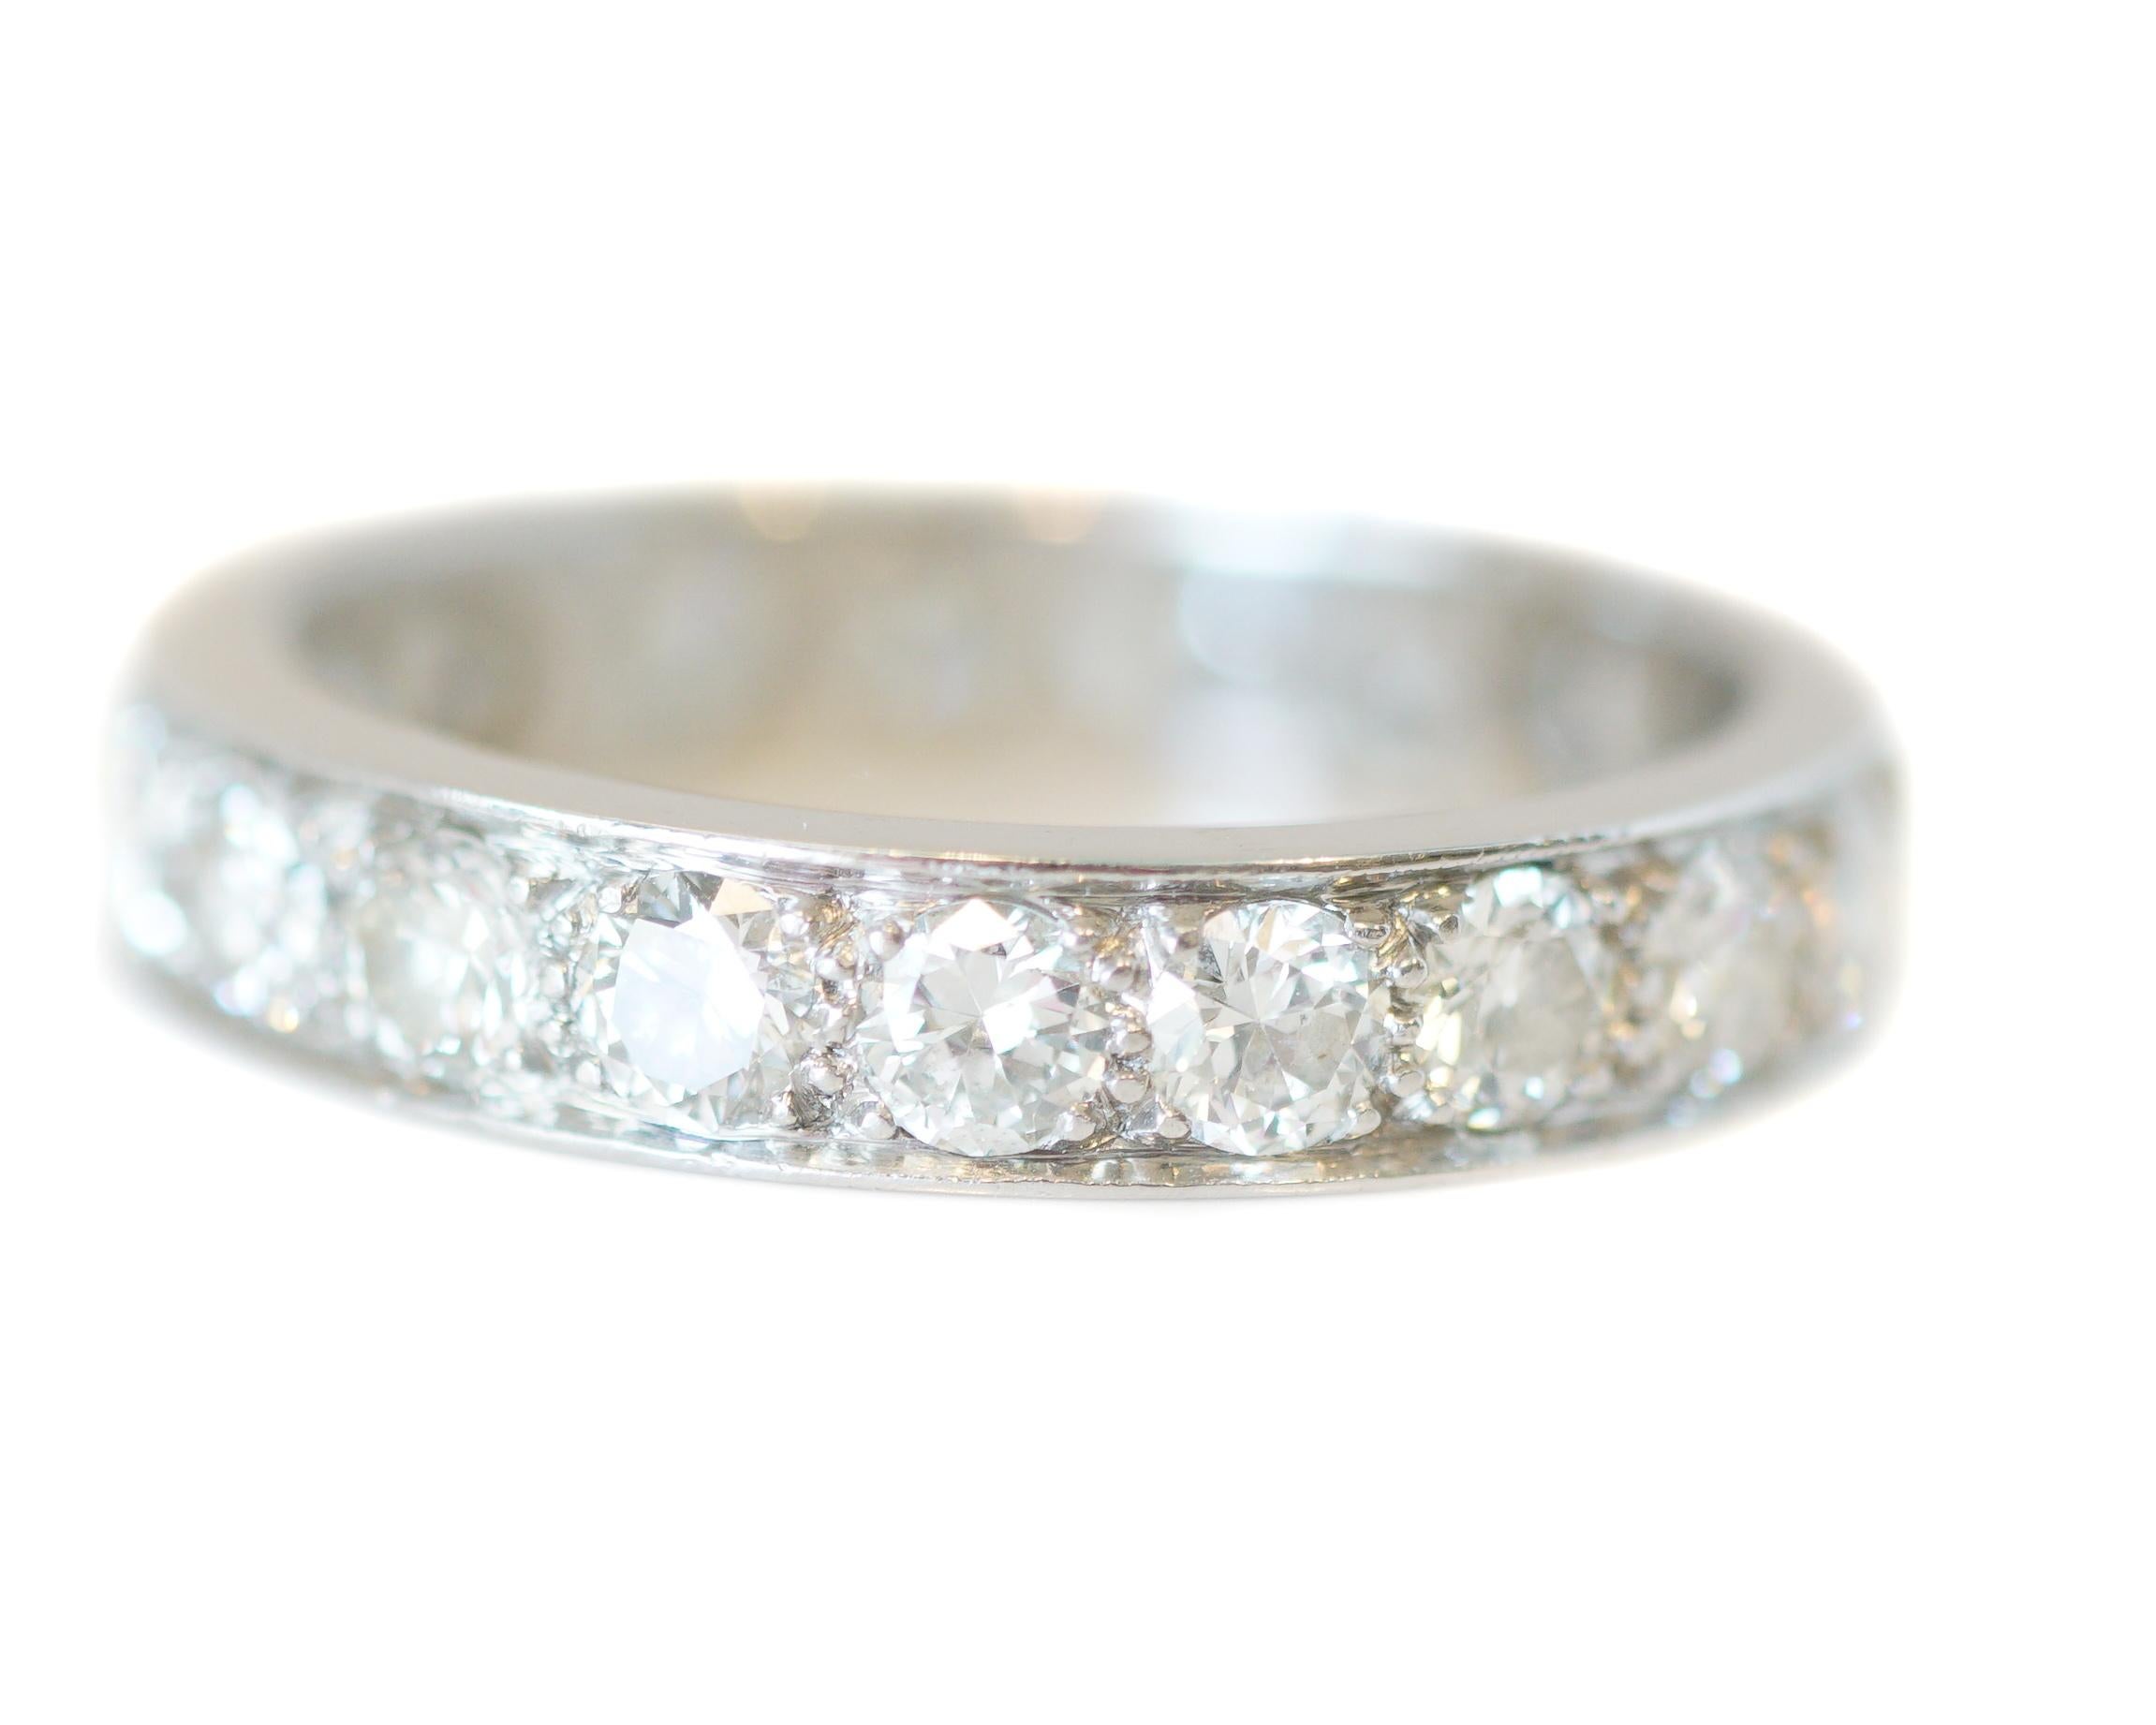 Here we have an 1950s Platinum Diamond wedding band! The diamonds are 2.09 cttw 